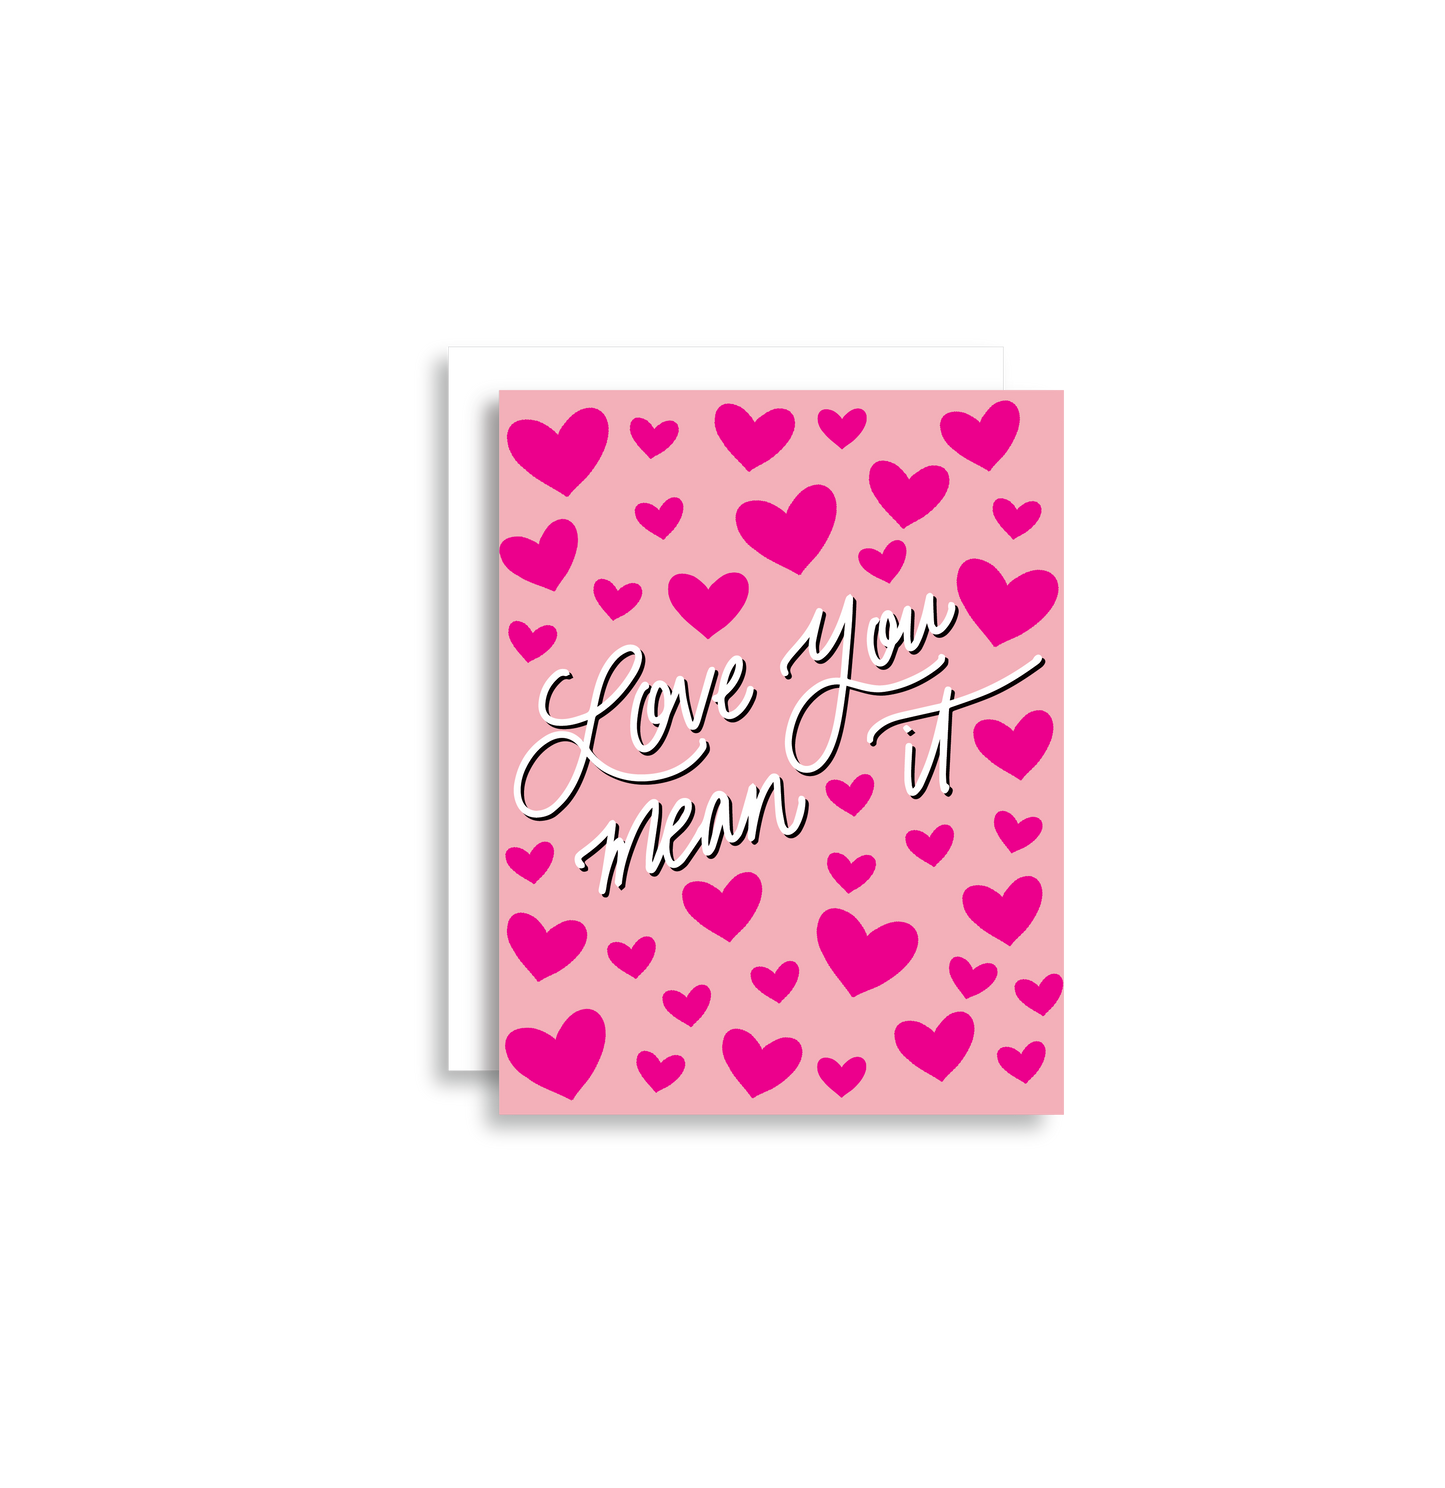 Our "Love You Mean It!" Valentine's Day card features hand drawn hearts on a pink background - it is perfect for a kid or adult! Each card is folded to 4.25" tall by 5.5" wide, is blank inside and comes with a matching white envelope. Cards are packaged in cellophane sleeves.